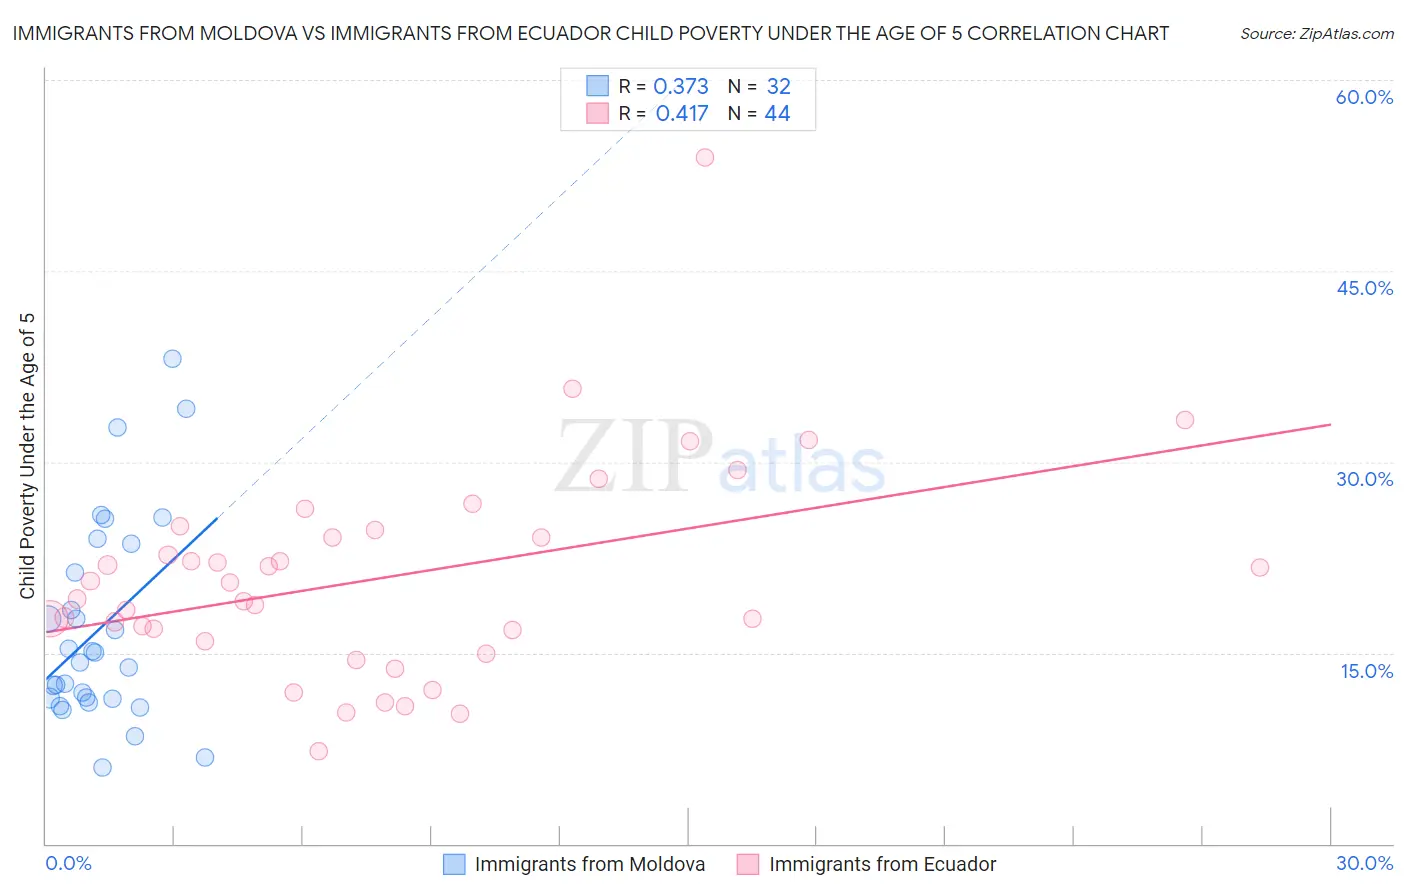 Immigrants from Moldova vs Immigrants from Ecuador Child Poverty Under the Age of 5